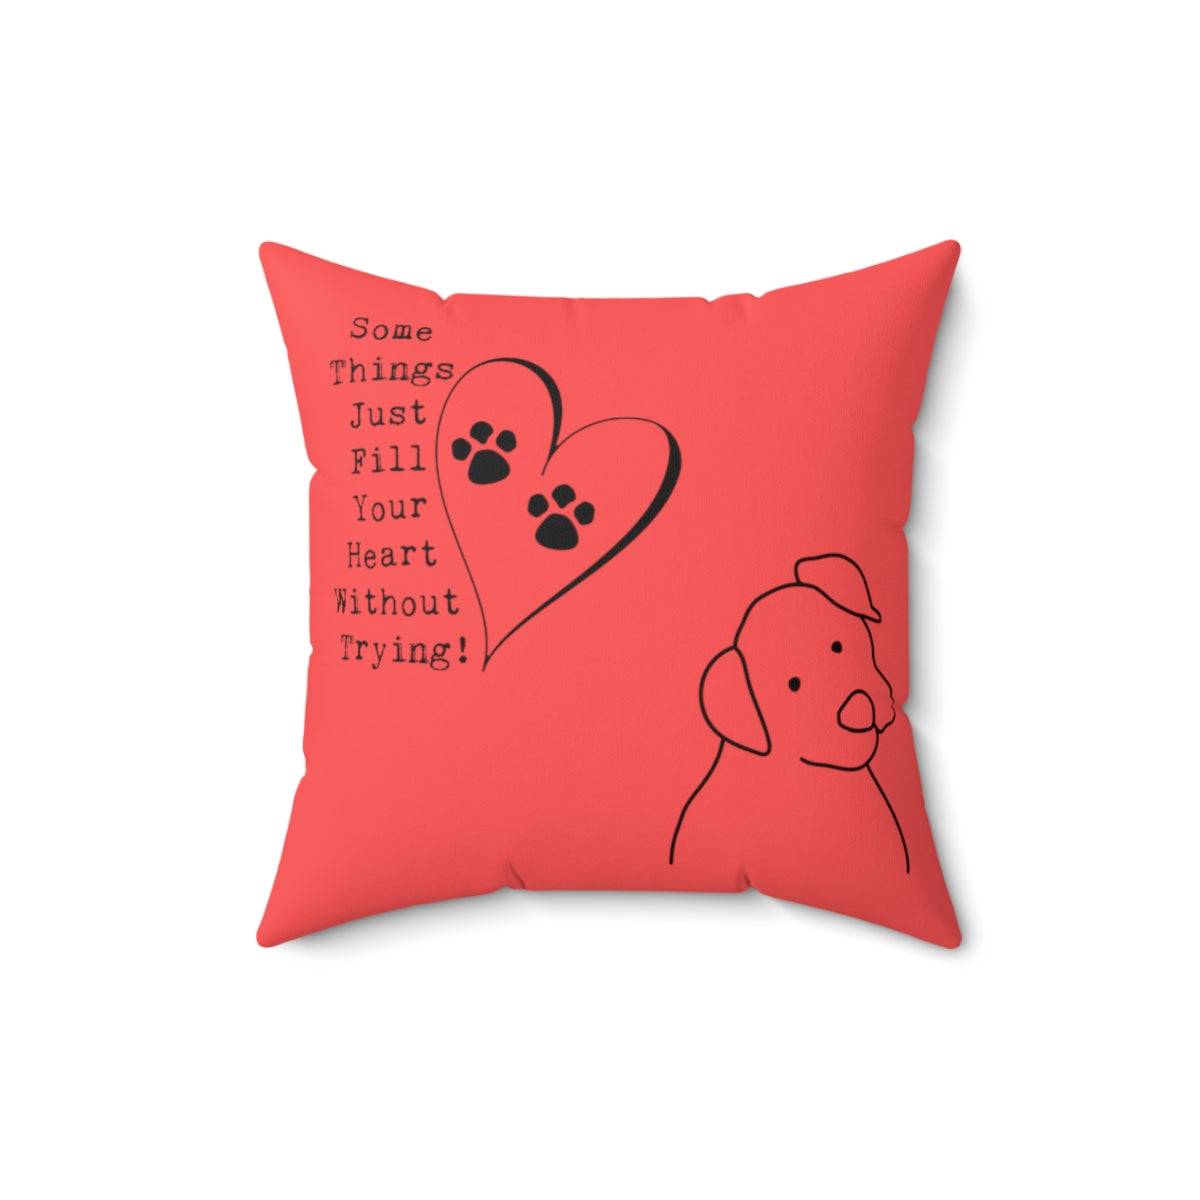 Coral Square Pillow Case - Some Things Fill Your Heart Without Trying - Home Decor Pillow Cover - Accent Pillow Cover